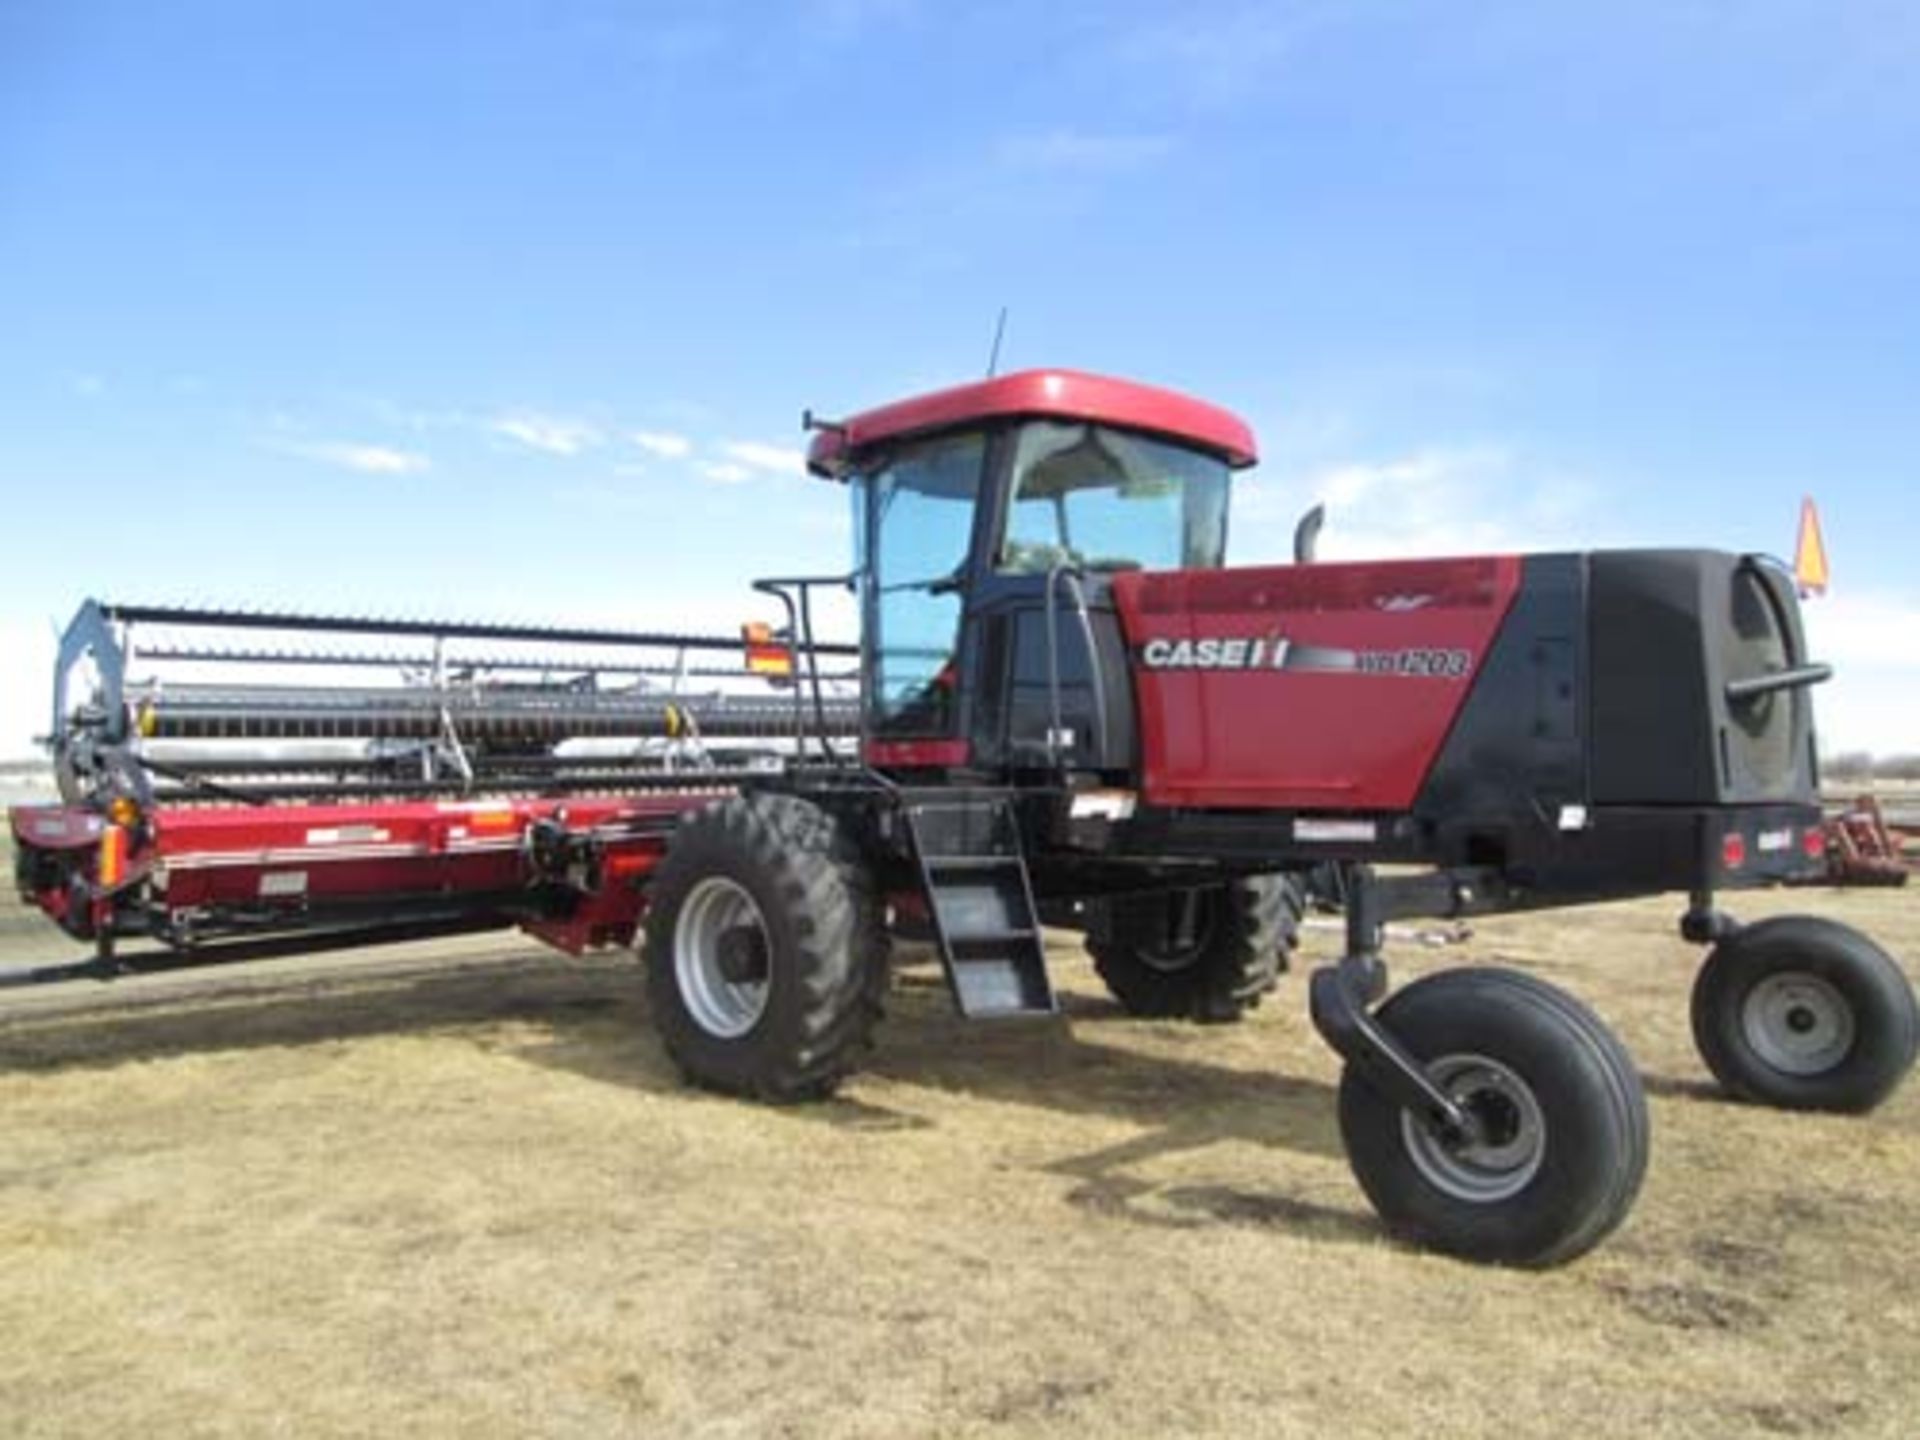 2014 CASE IH WD 1203 25' Windrower - Image 4 of 13